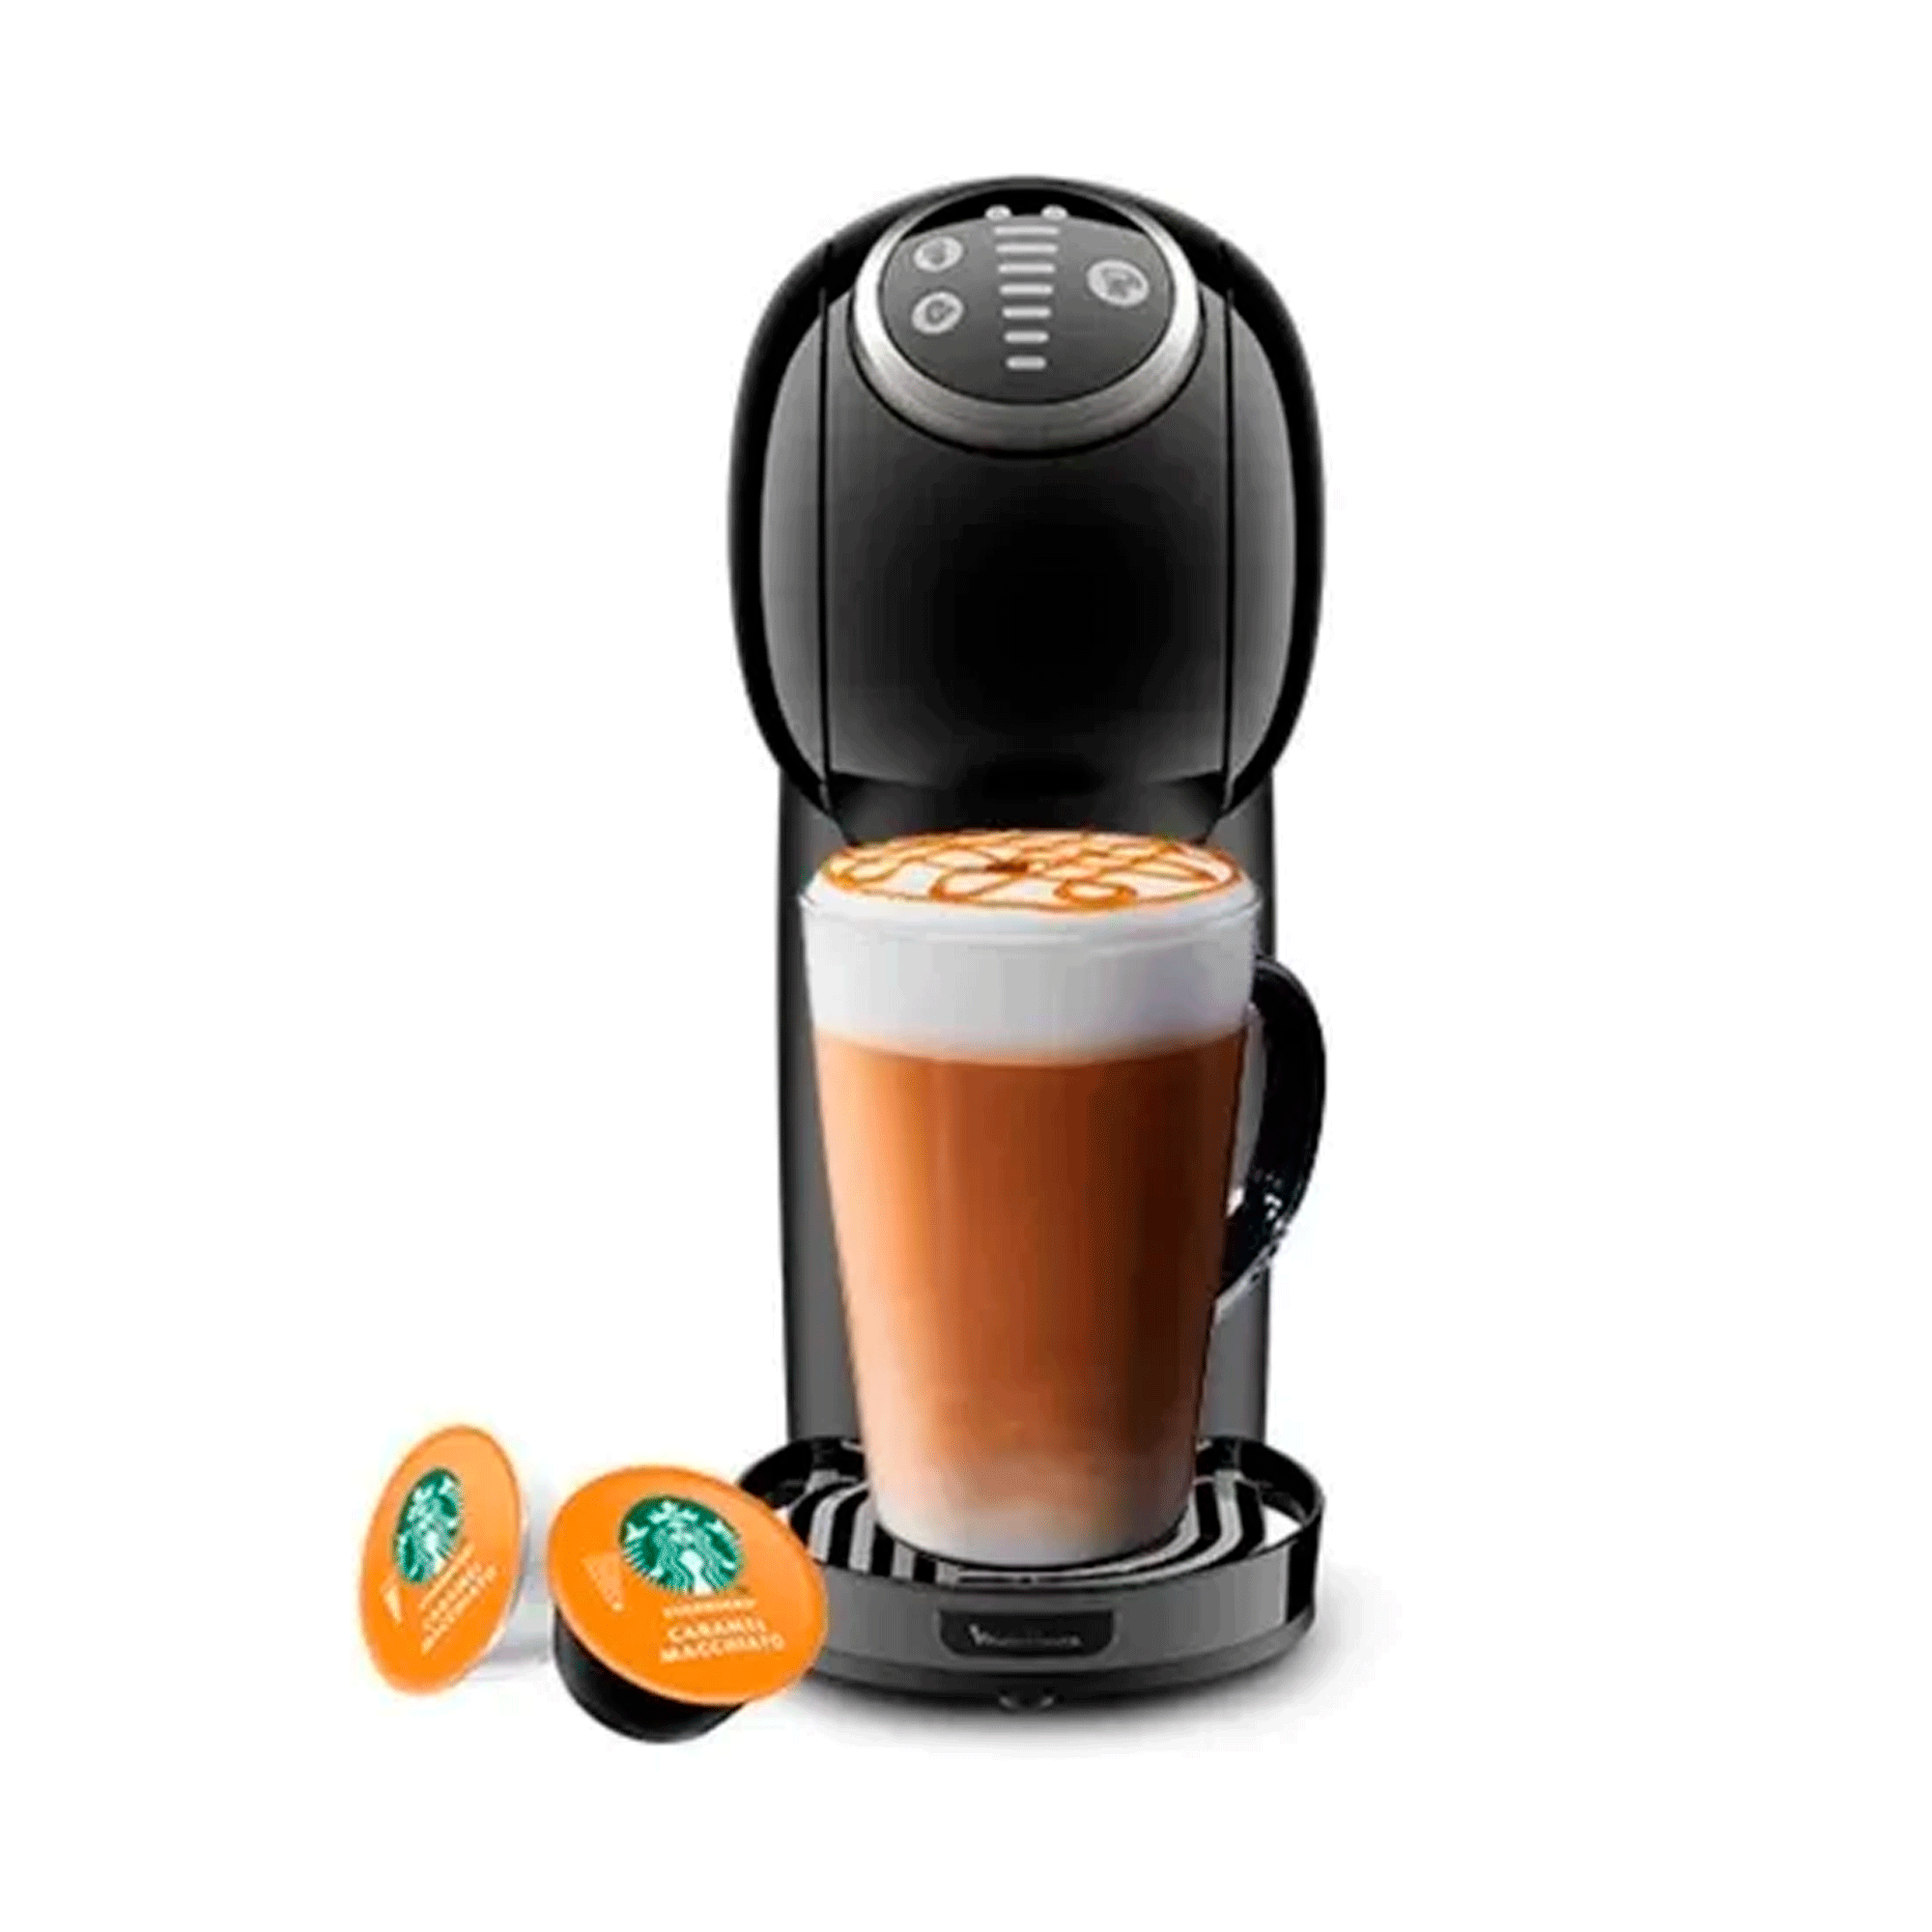 PV340858 MOULINEX                                                     | CAFETERA MOULINEX DOLCE GUSTO GENIO S PLUS PV340858 NEGRA                                                                                                                                                                                                 